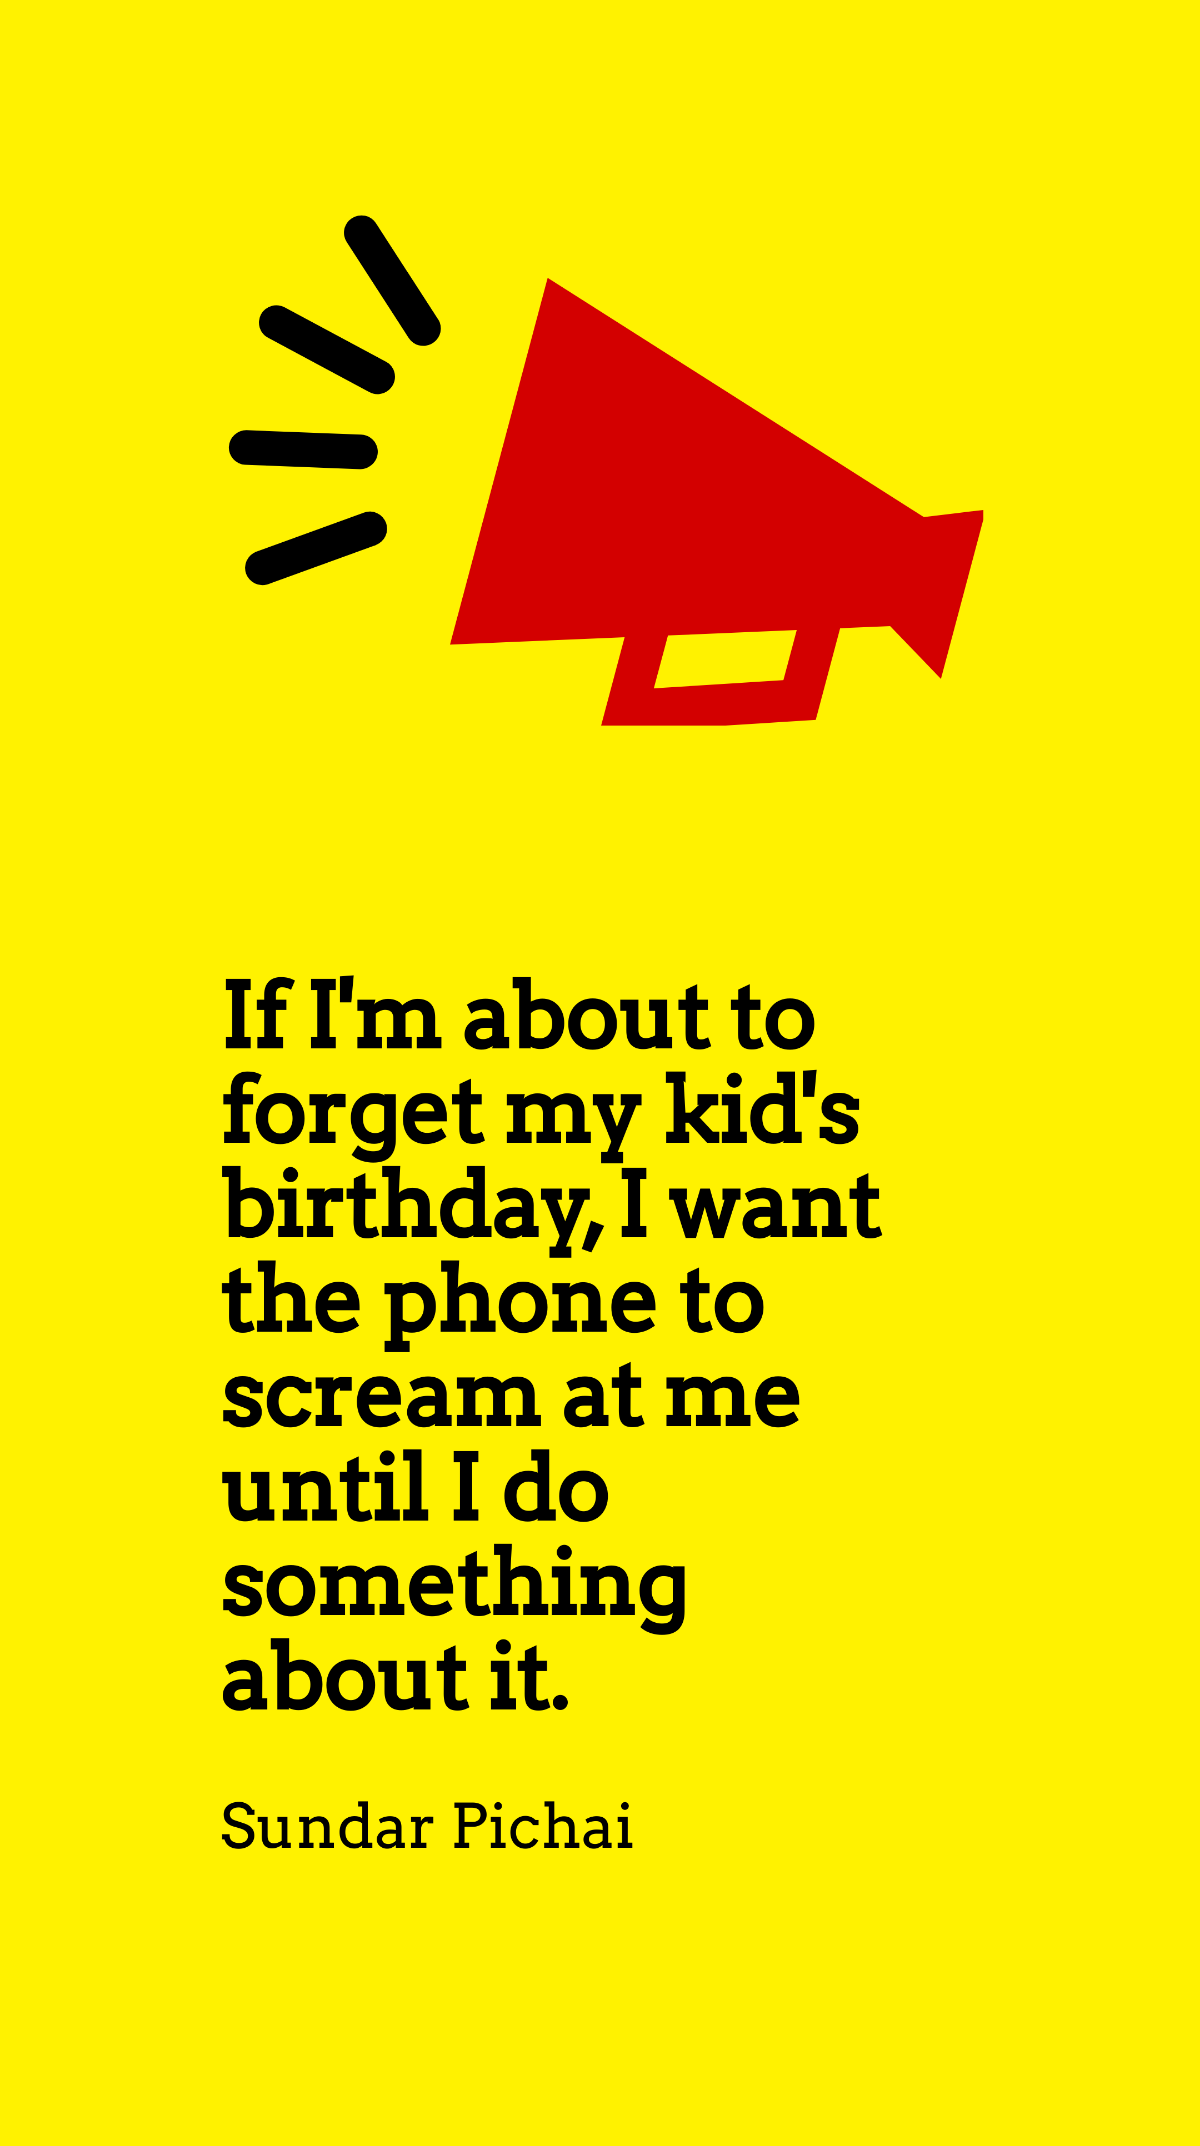 Sundar Pichai - If I'm about to forget my kid's birthday, I want the phone to scream at me until I do something about it.